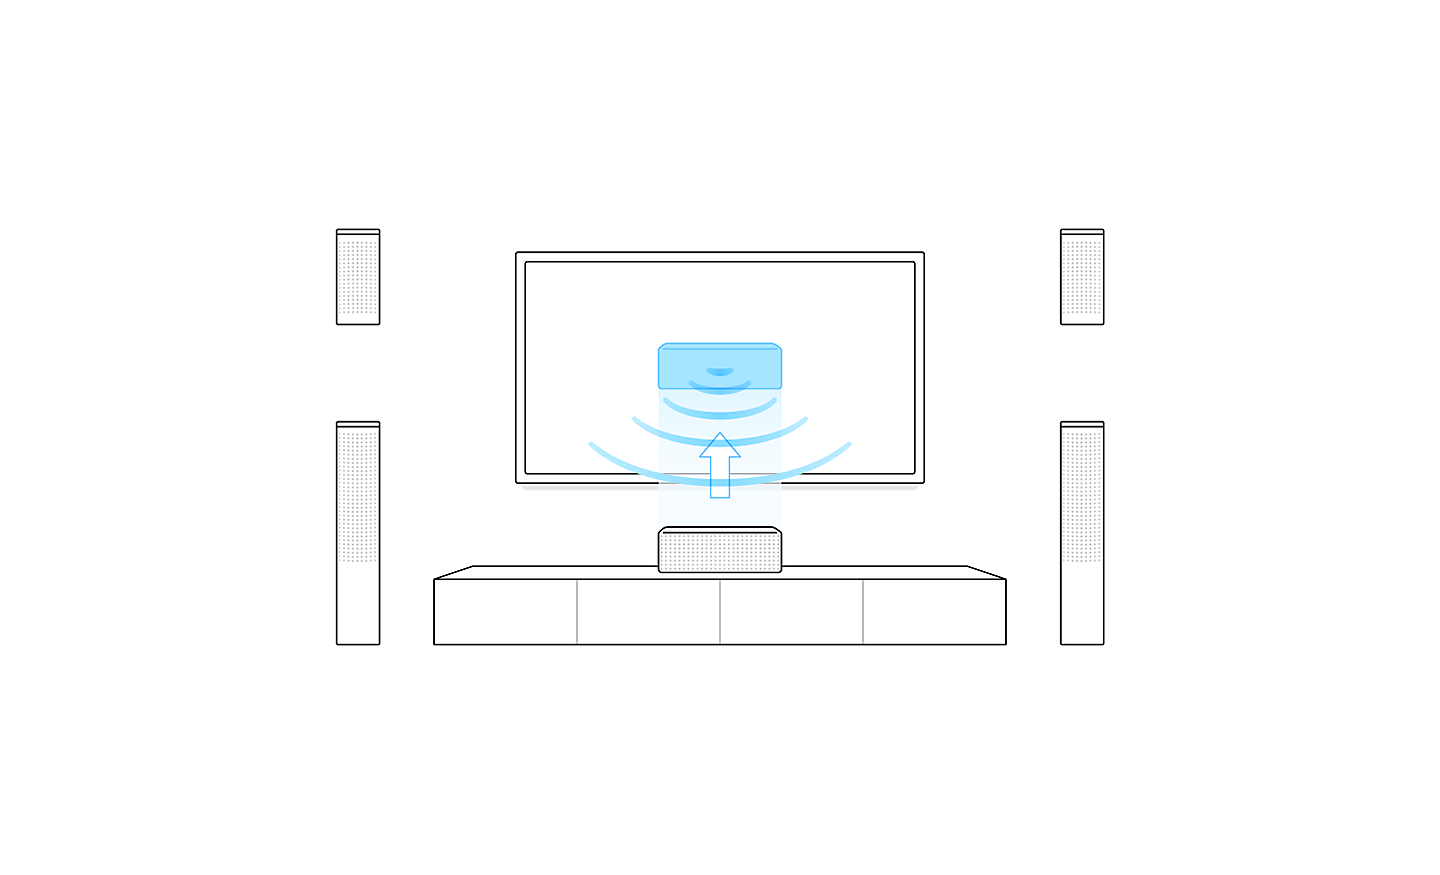 Outline image of a TV with speakers, a blue version of the center speaker sits in front of the TV showing sound direction